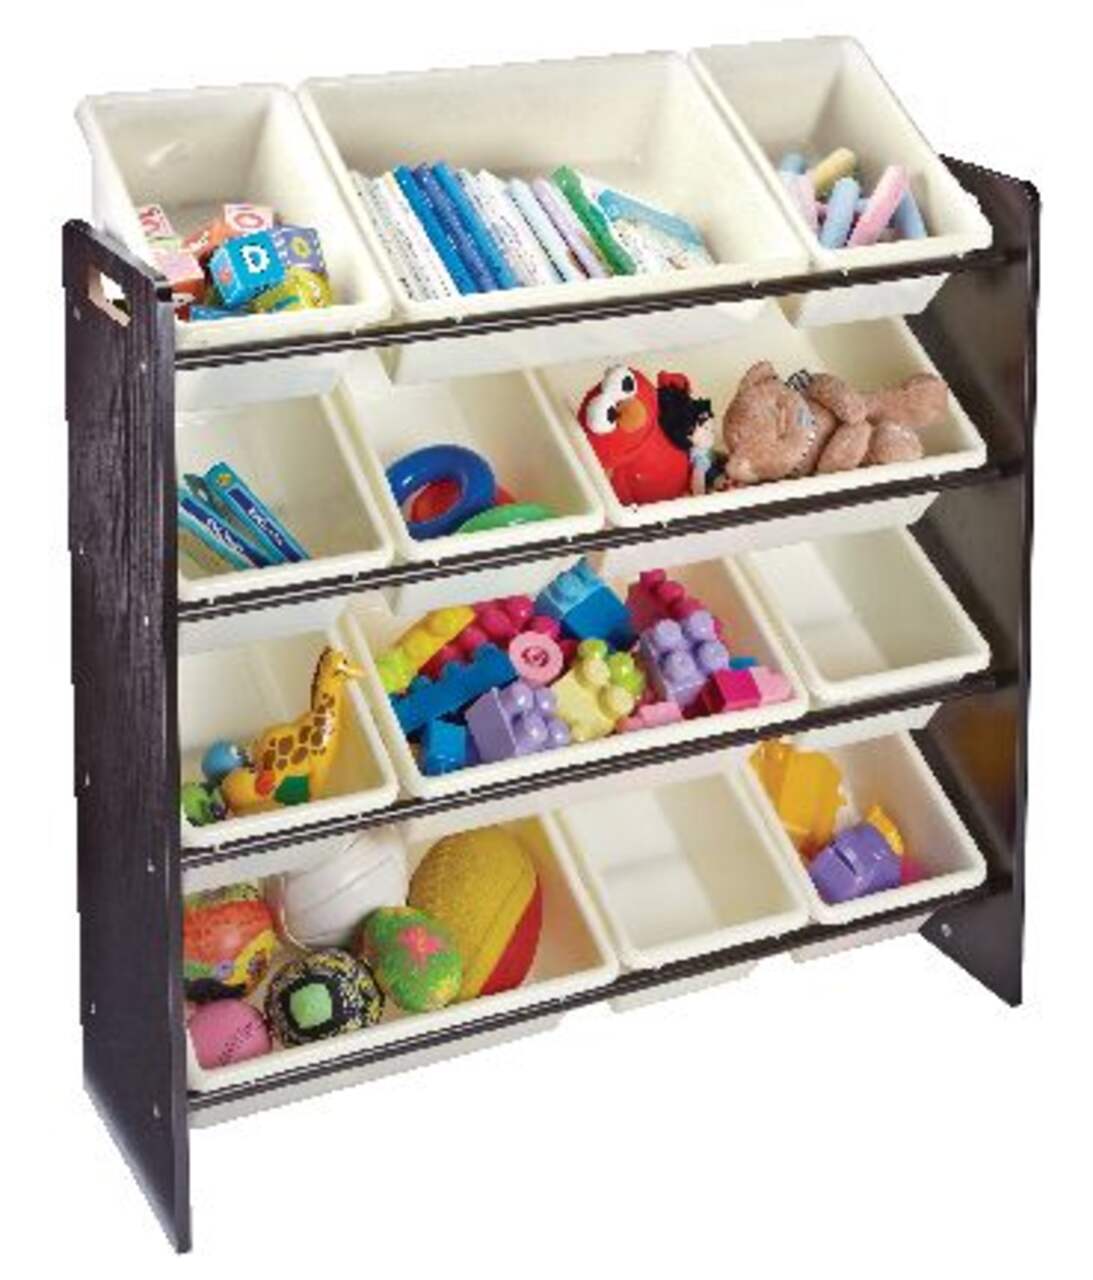 For Living 12-Bin Toy & Storage Organizer For Bedroom/Playroom